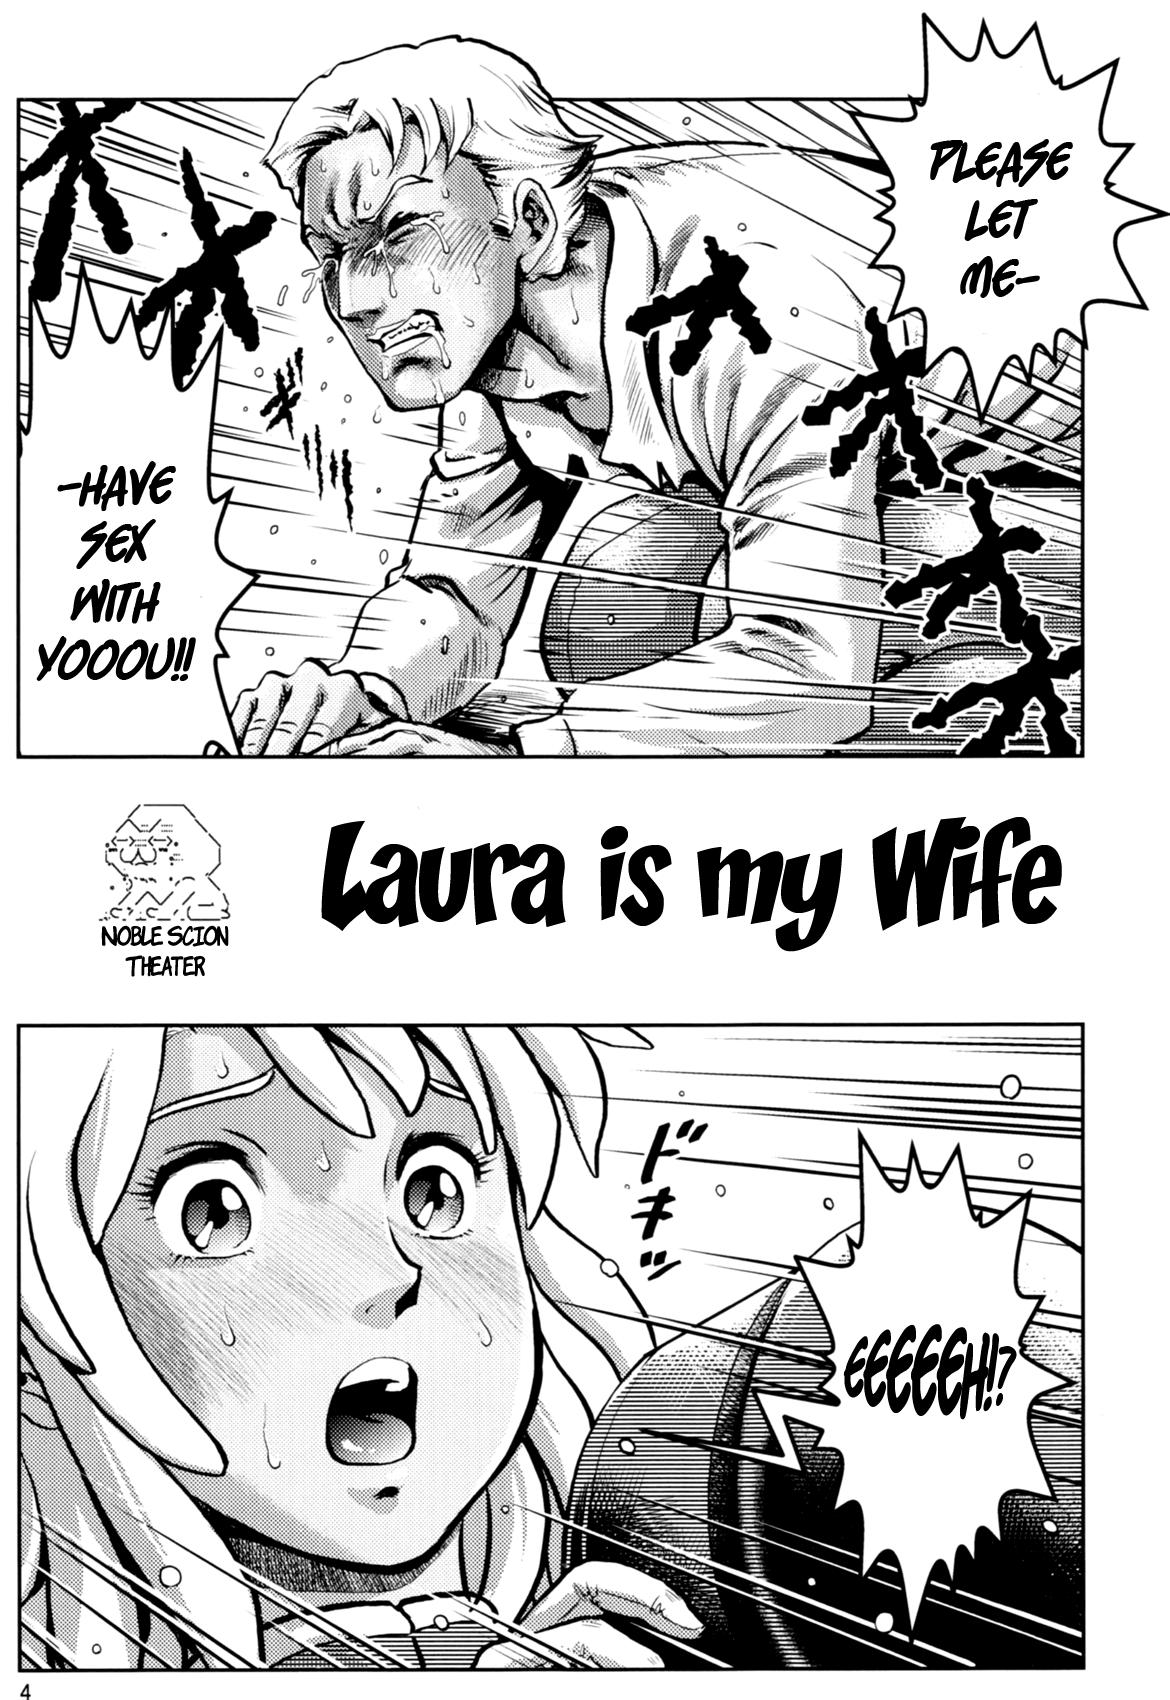 Best Blowjobs Laura wa Ore no Yome | Laura is my Wife - Turn a gundam Asian Babes - Page 3